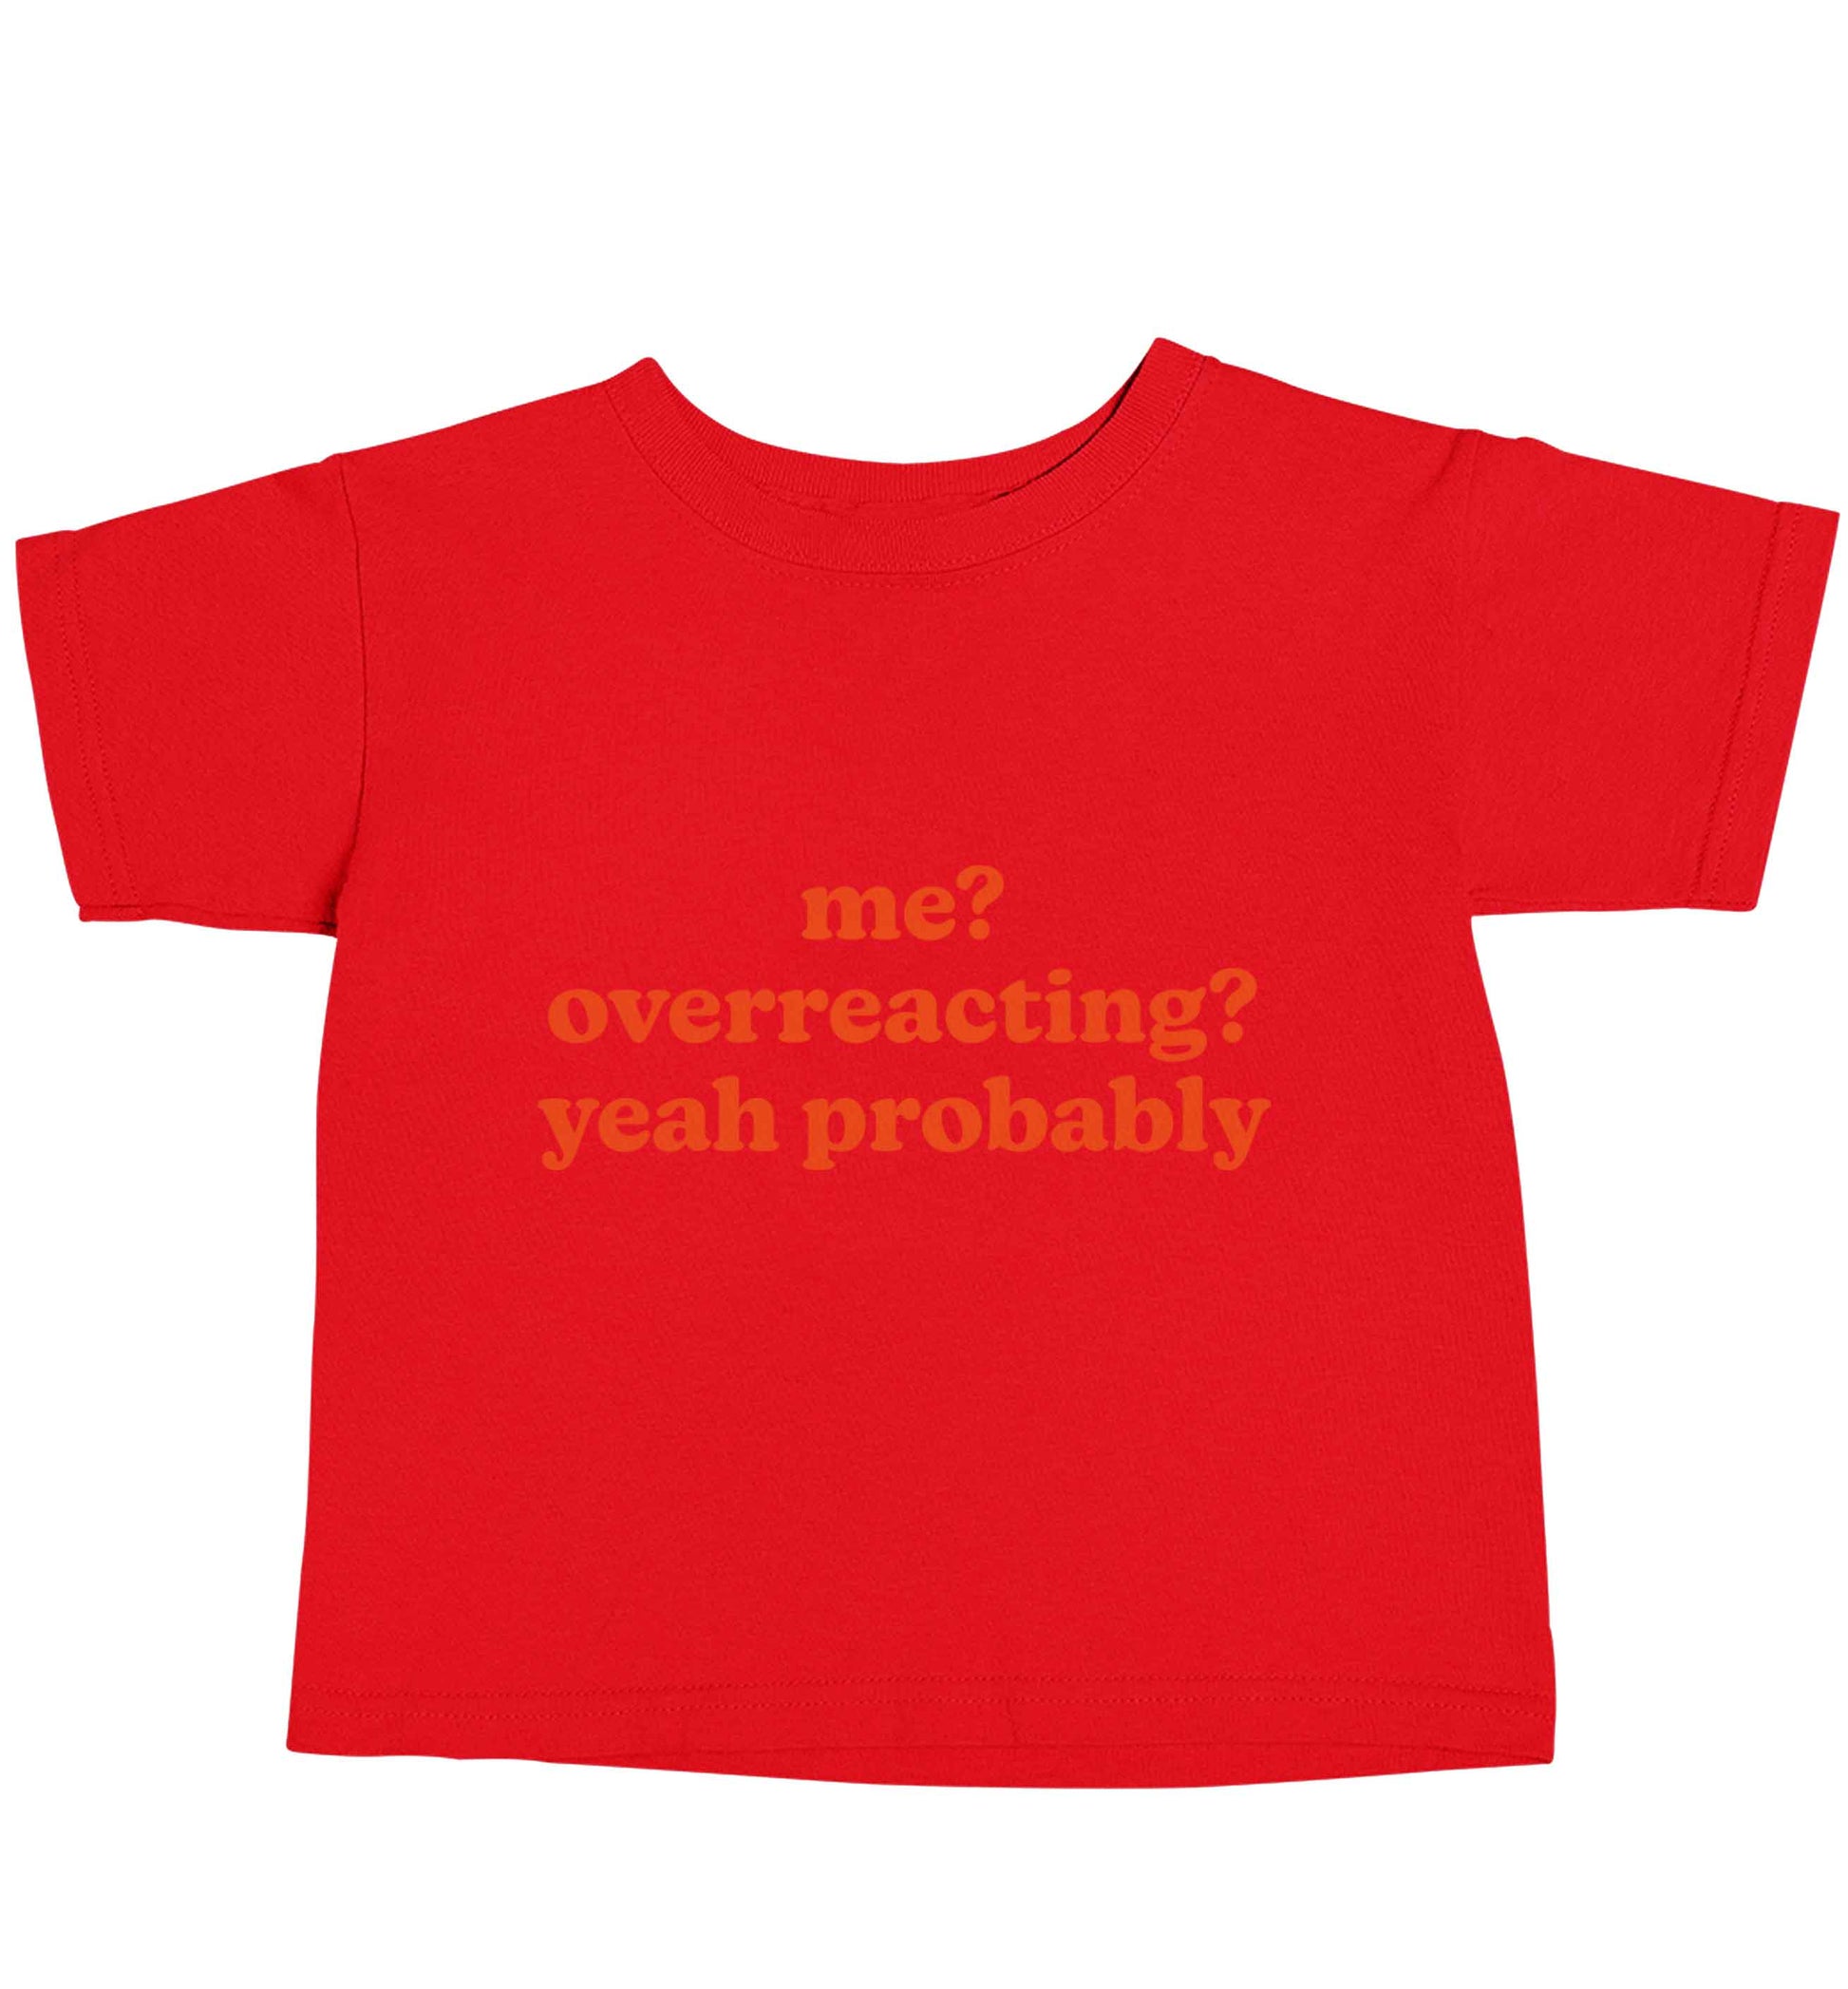 Me? Overreacting? Yeah probably red baby toddler Tshirt 2 Years